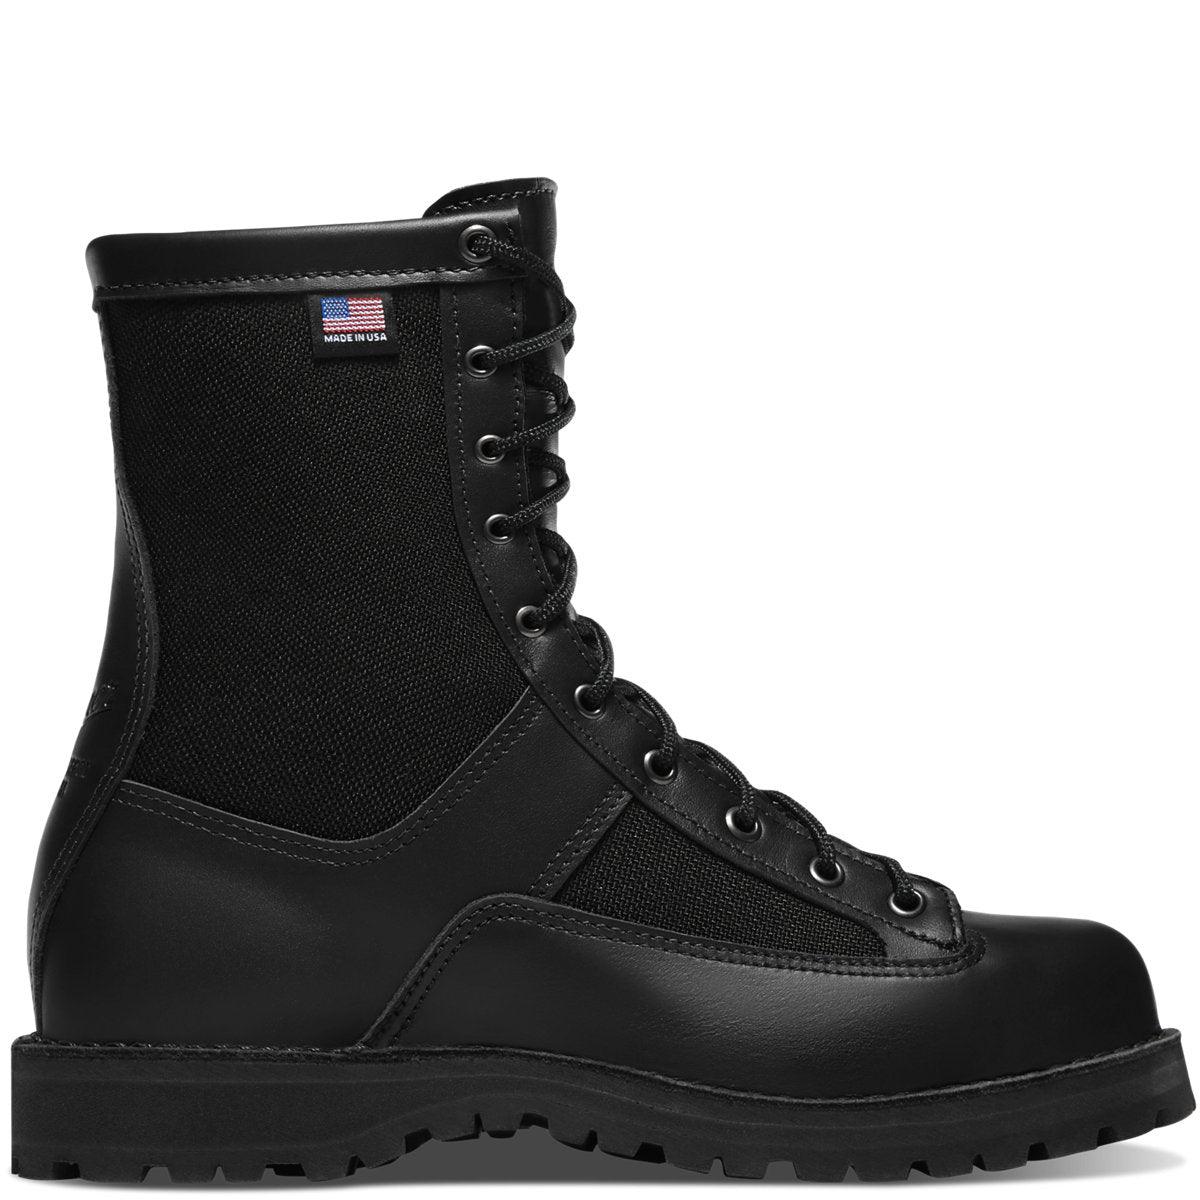 Acadia 8" Black Law Enforcement Boot - Purpose-Built / Home of the Trades